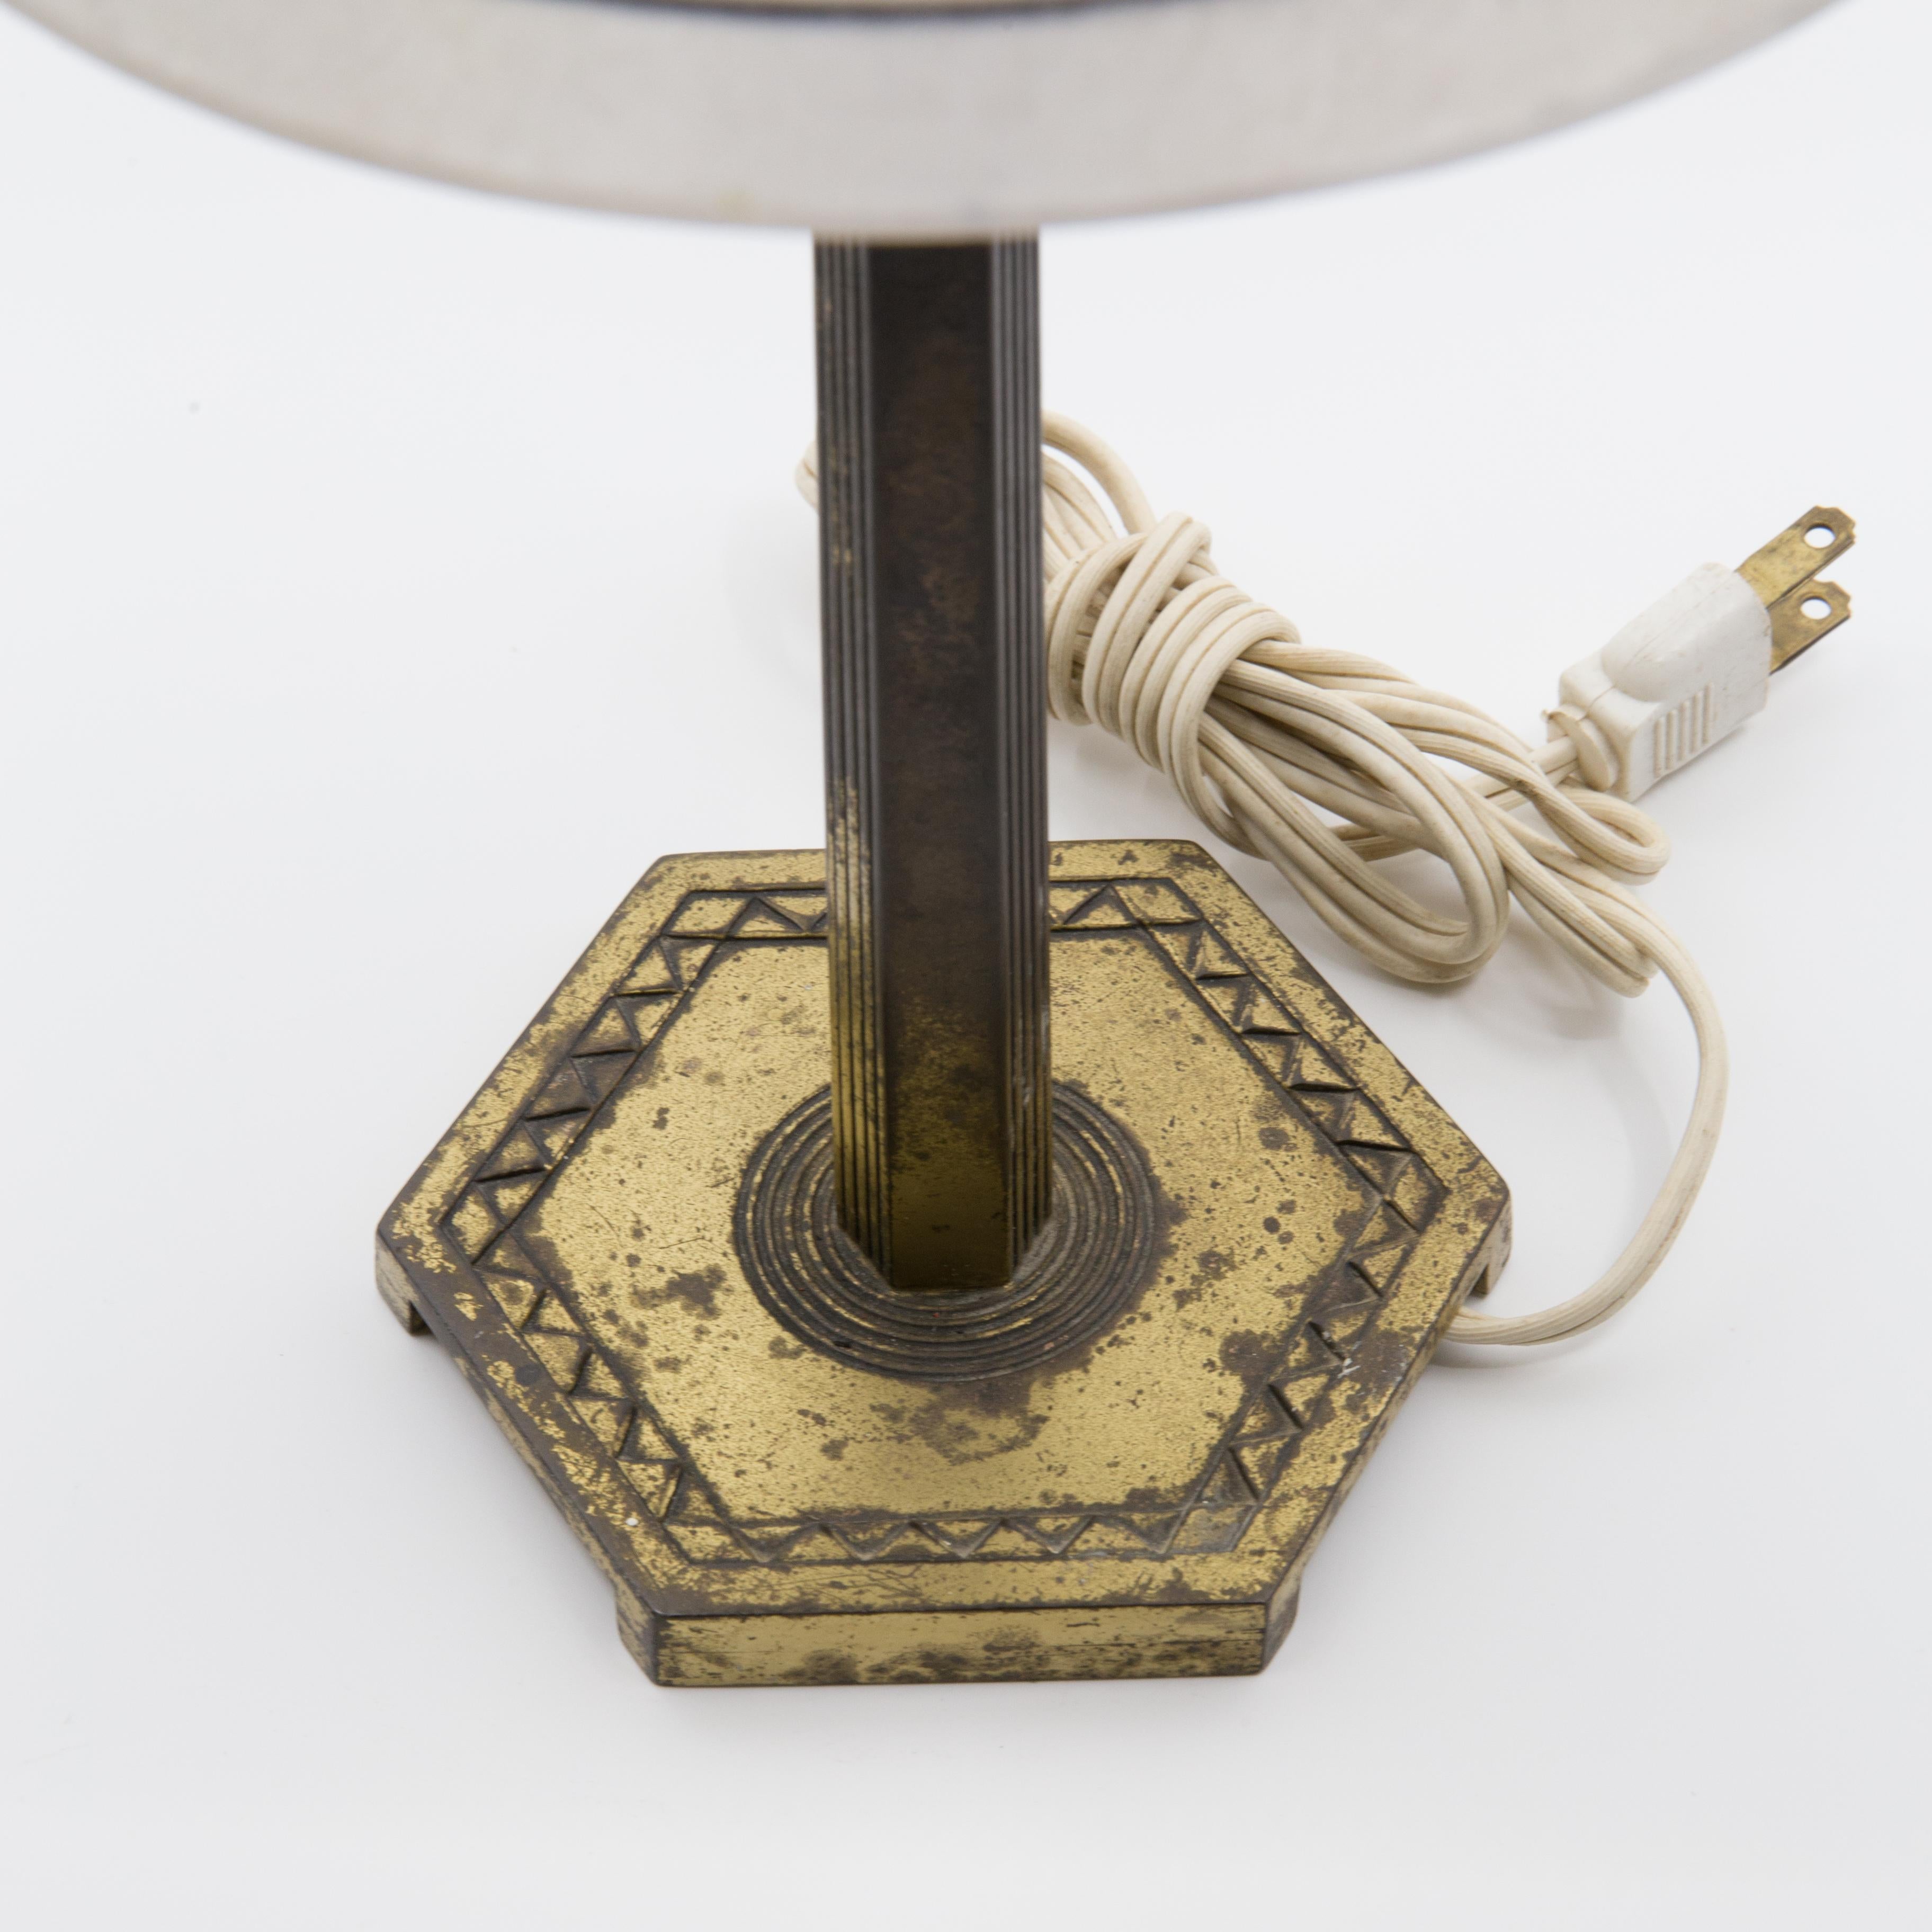 Early 20th Century Pairpoint Art Deco Reverse Painted Signed Desk Lamp, circa 1925